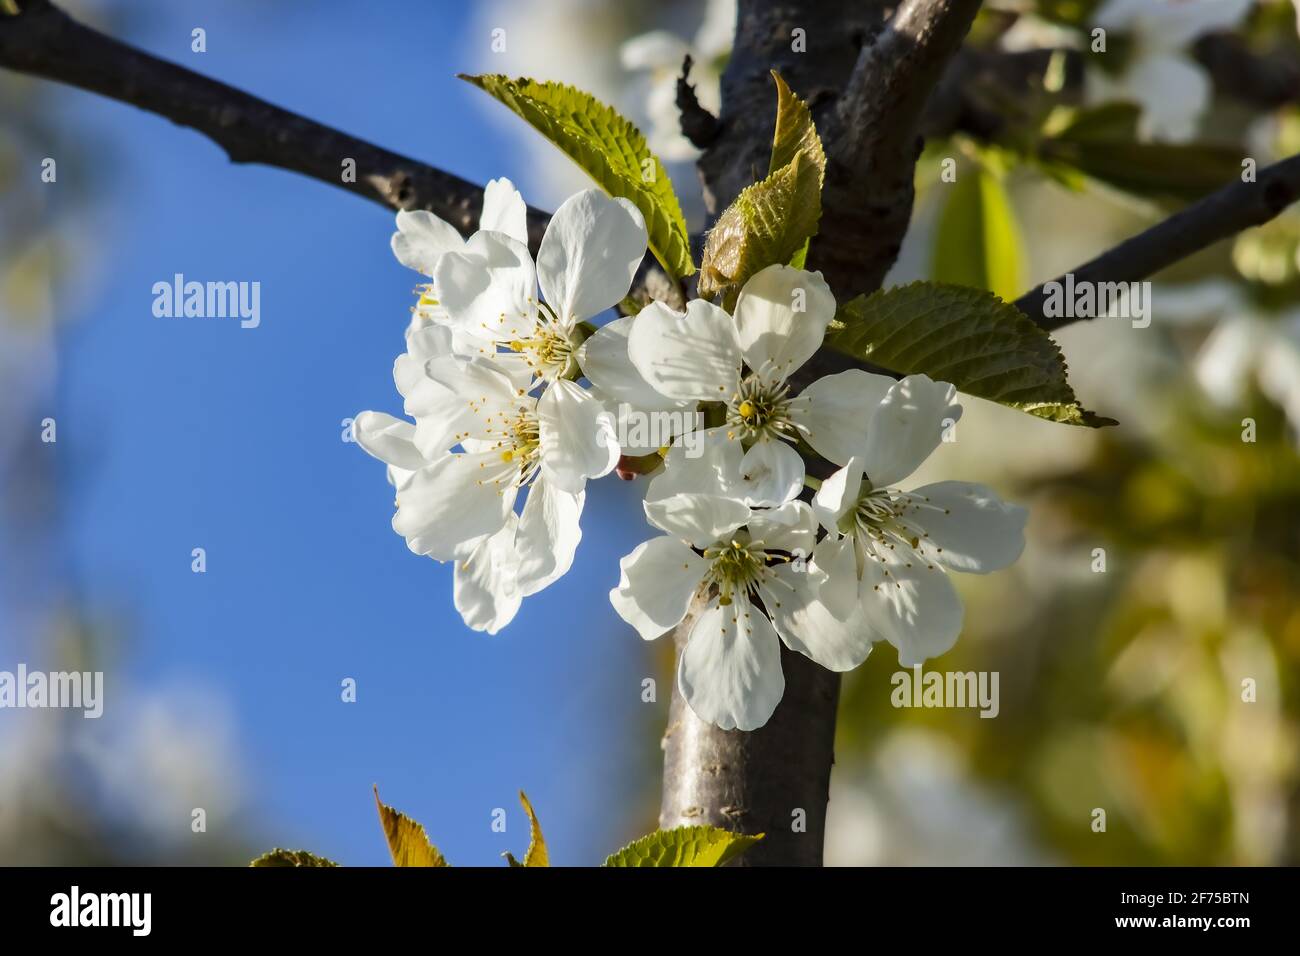 A Cluster of Cherry Blossoms on a Branch. Photo Taken on Tree in Orchard. Natural Blurred Background. Stock Photo